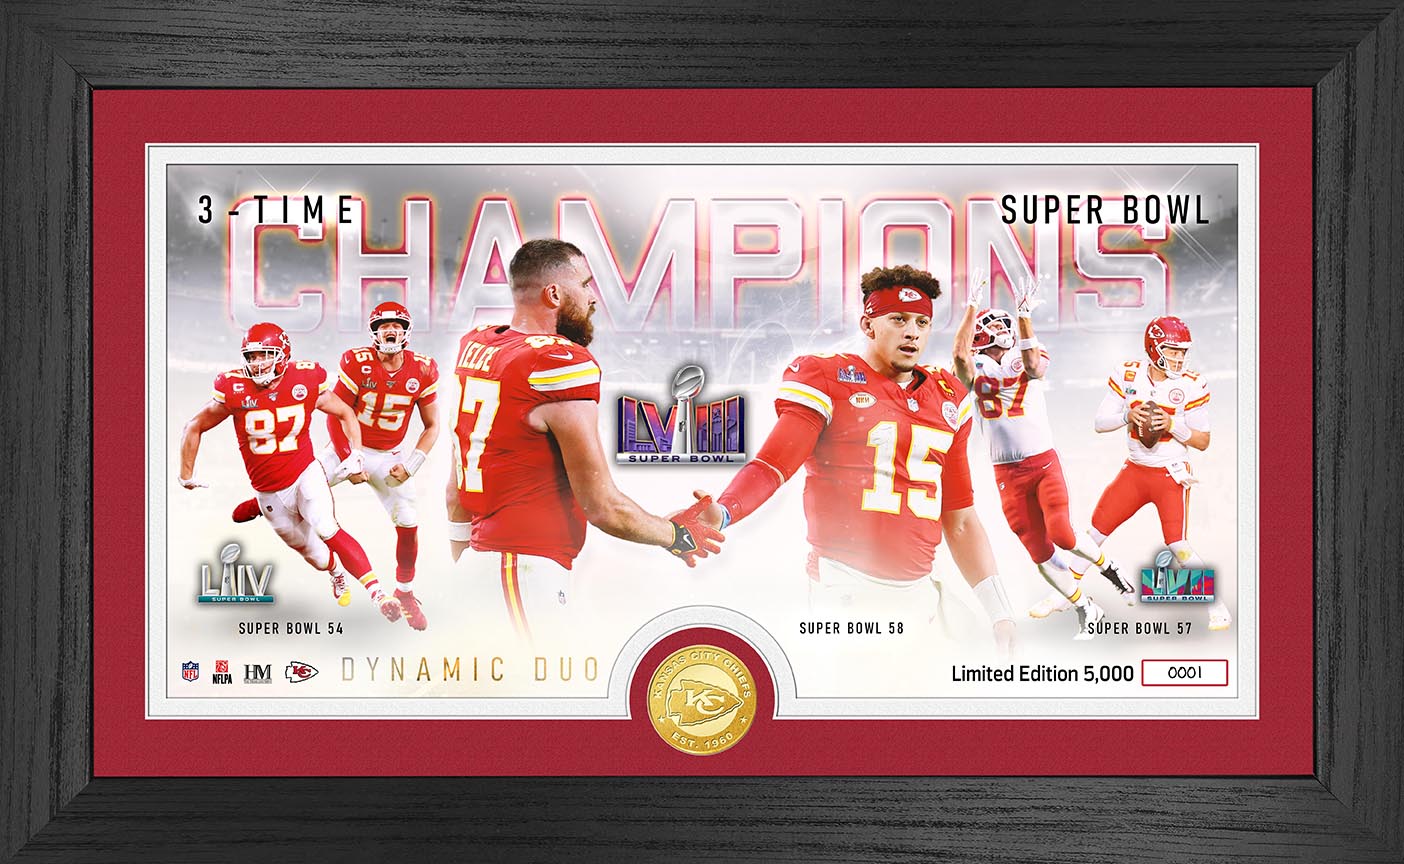 Mahomes & Kelce 3 â€“ Time Super Bowl Champions Pano Bronze Coin Photo Mint